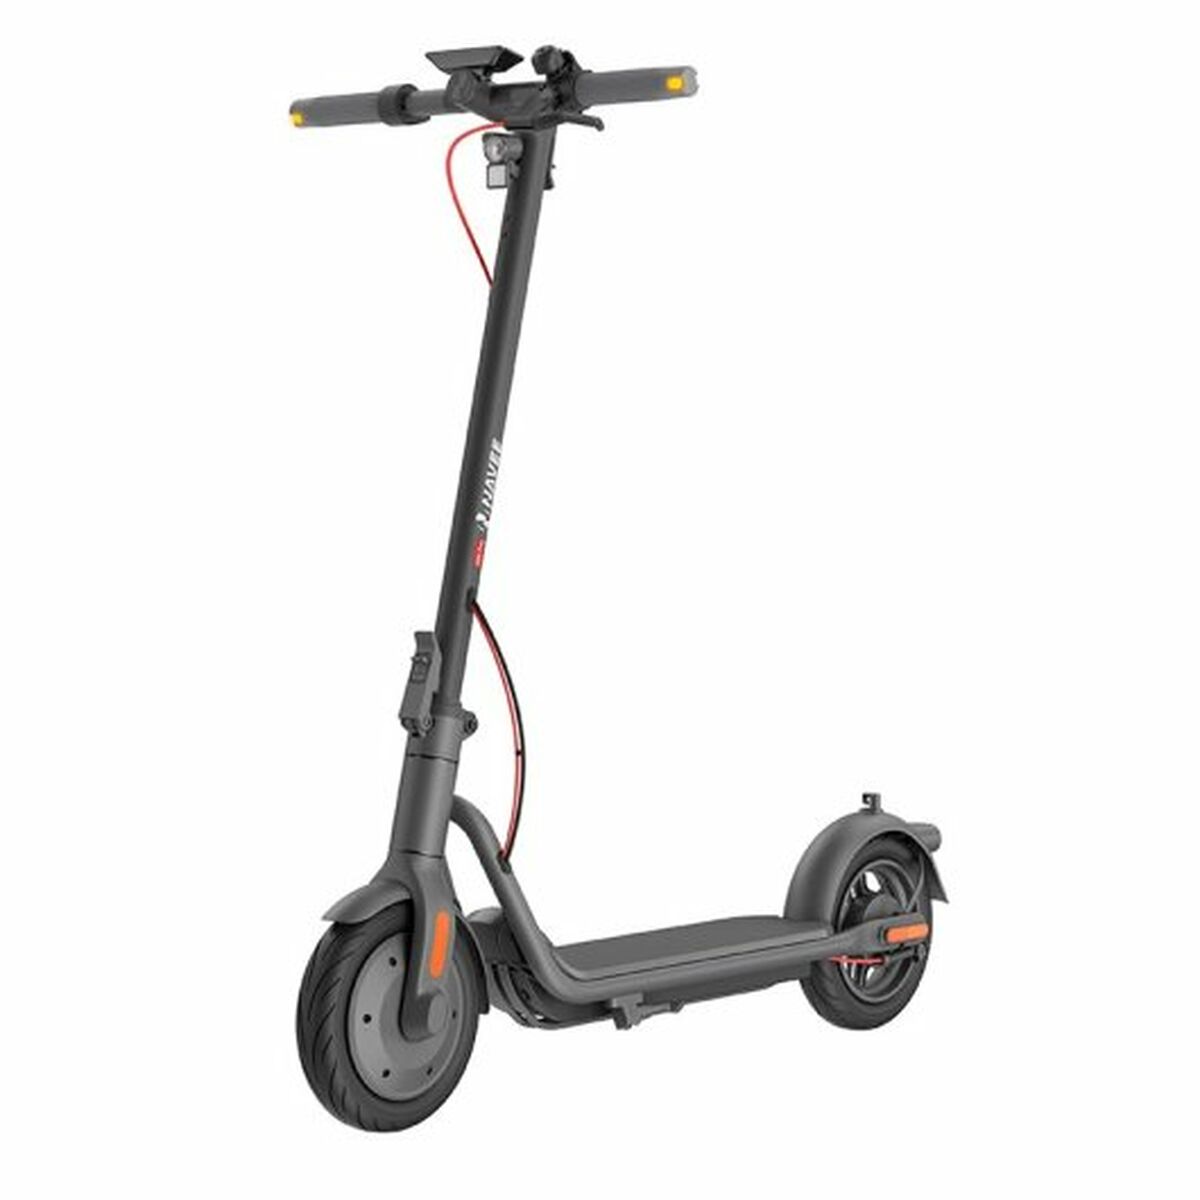 Electric Scooter Navee V25i Pro Black 300 W 20 km/h, Navee, Sports and outdoors, Urban mobility, electric-scooter-navee-v25i-pro-black-300-w-20-km-h, Brand_Navee, category-reference-2609, category-reference-2629, category-reference-2904, category-reference-t-19681, category-reference-t-19756, category-reference-t-19876, category-reference-t-21245, category-reference-t-25387, Condition_NEW, deportista / en forma, Price_300 - 400, RiotNook